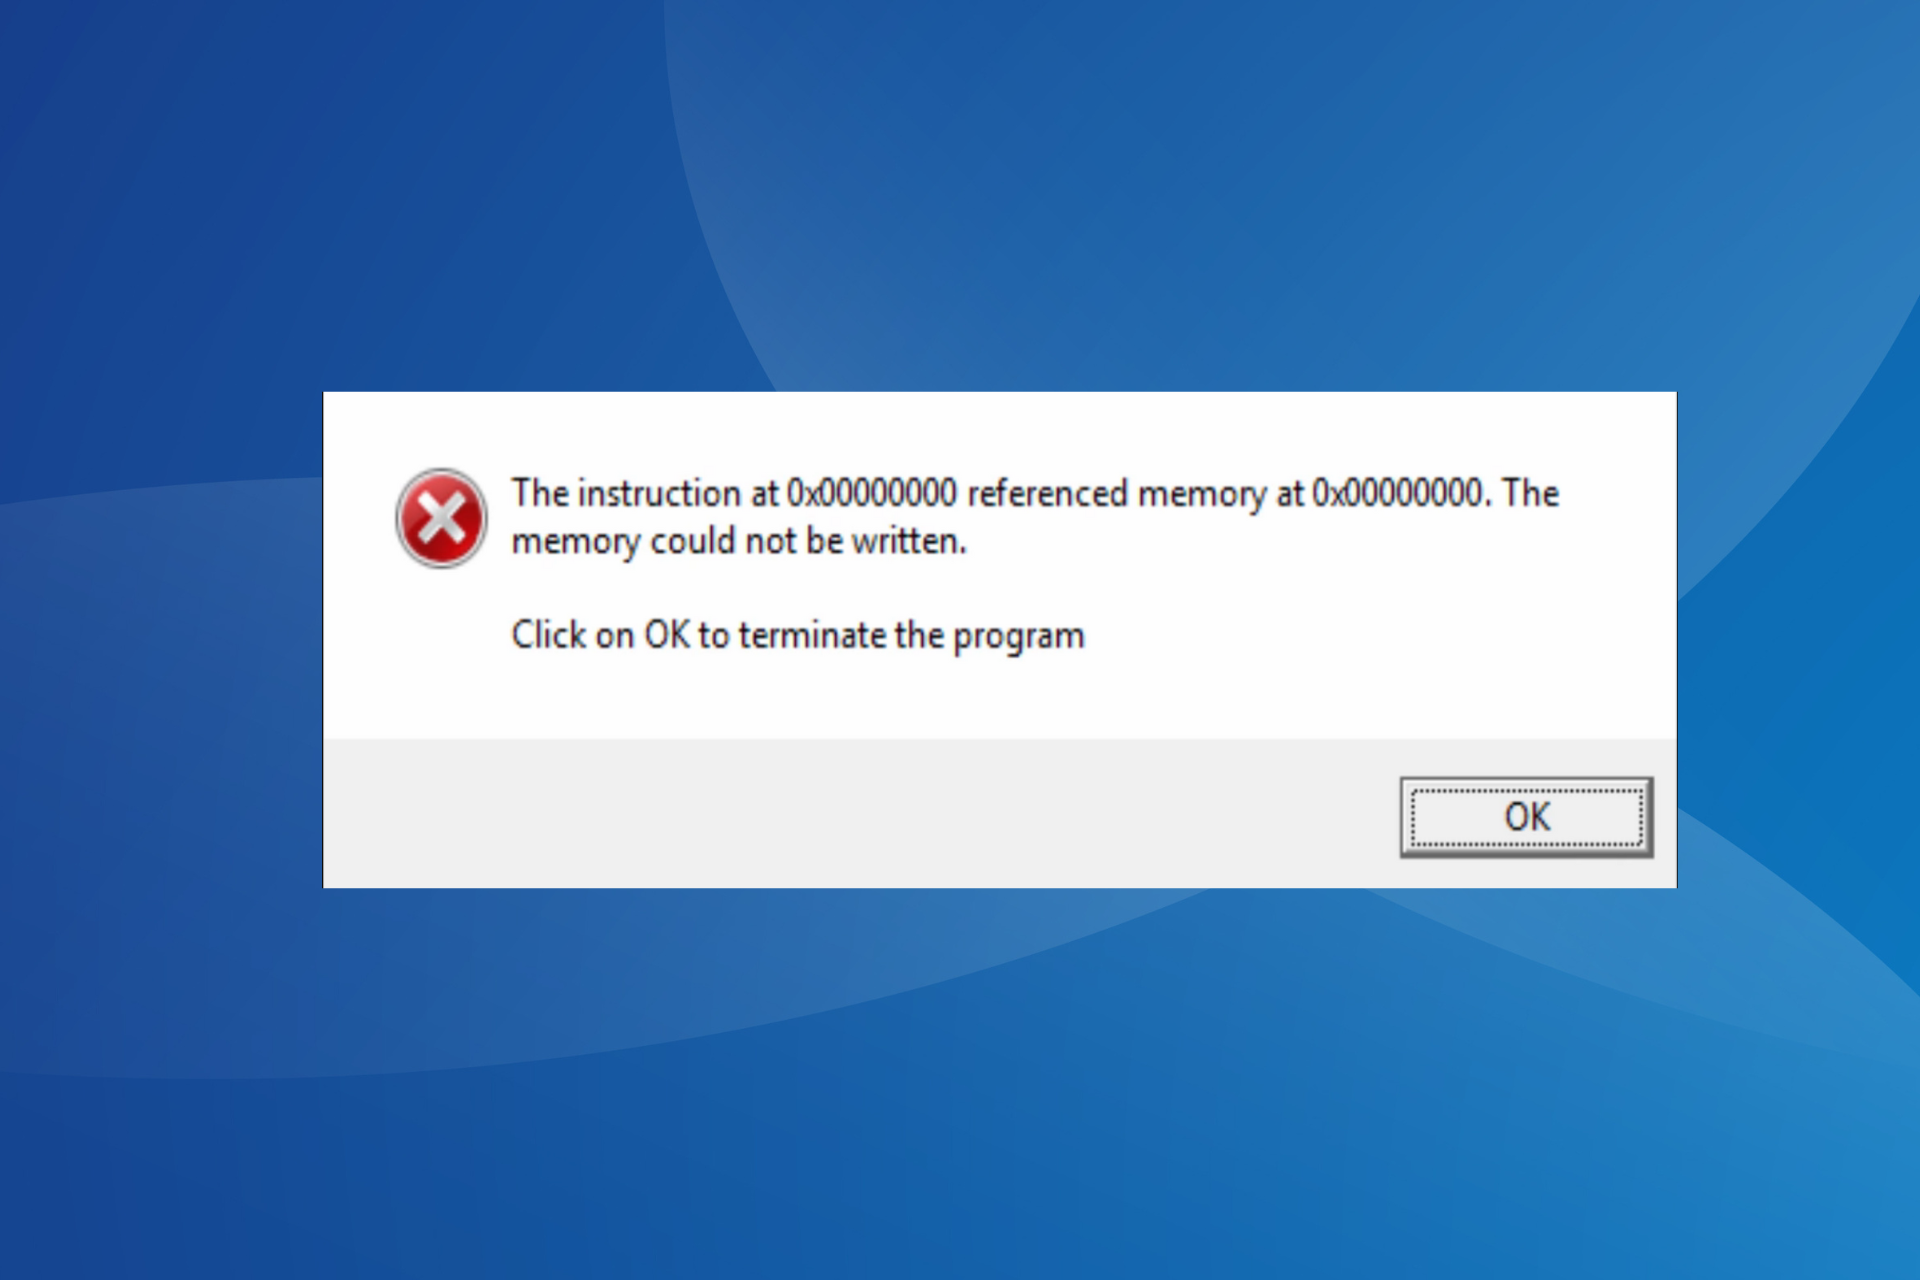 Fix the instruction at 0x000000000 referenced memory at 0x00000000 the memory could not be written error